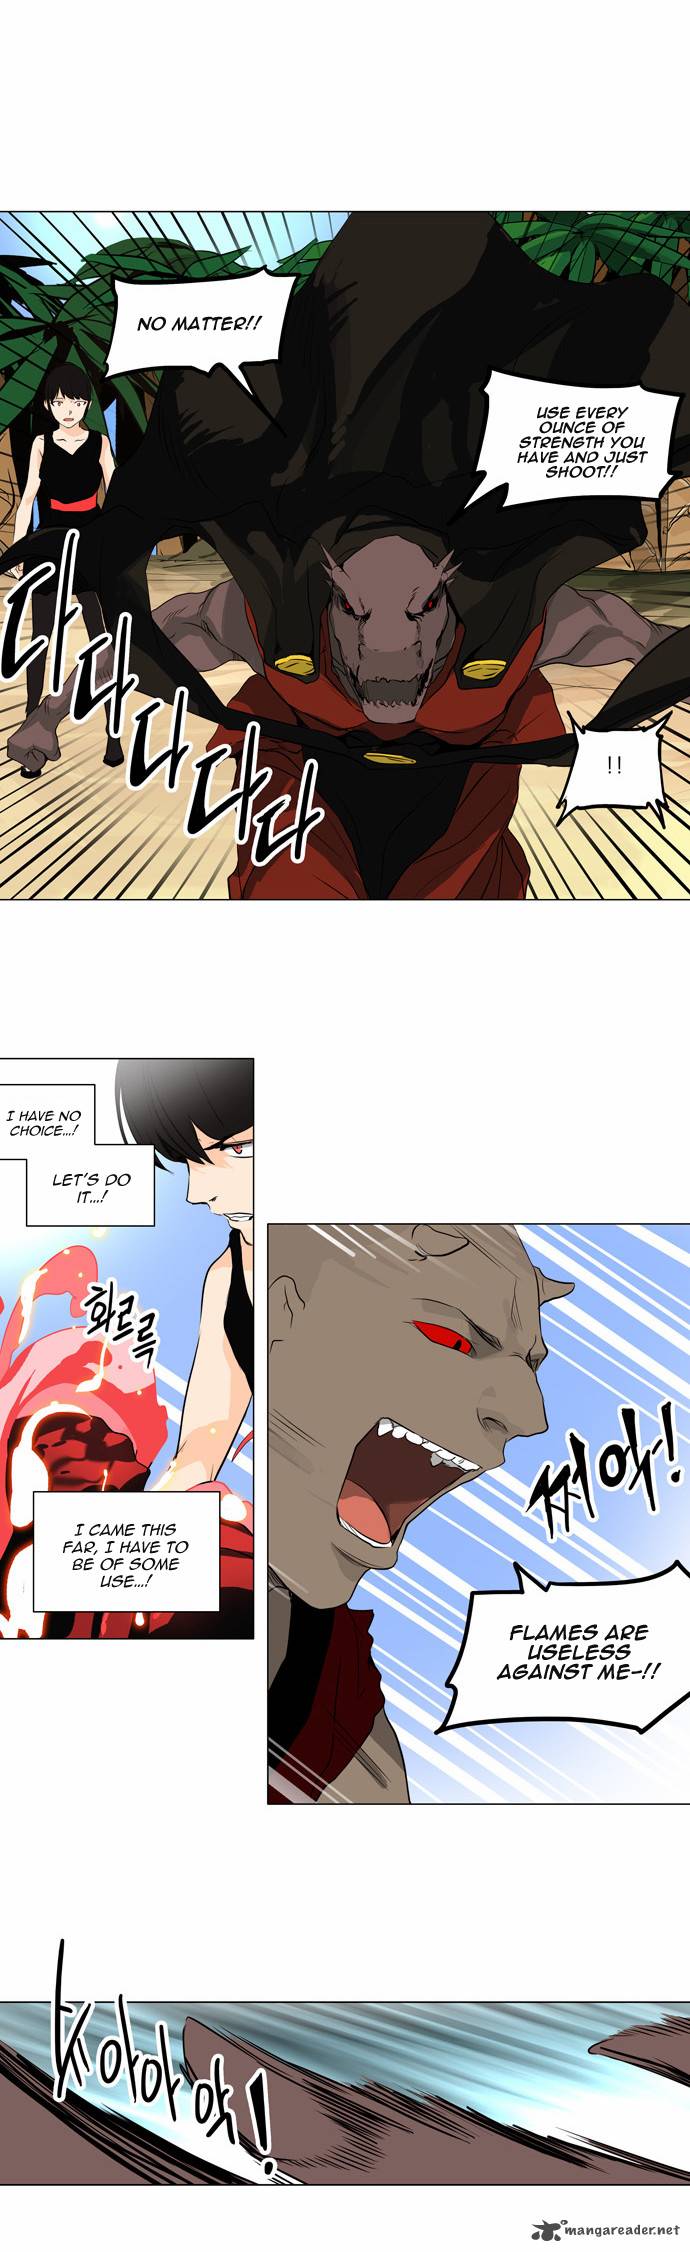 Tower Of God 168 13